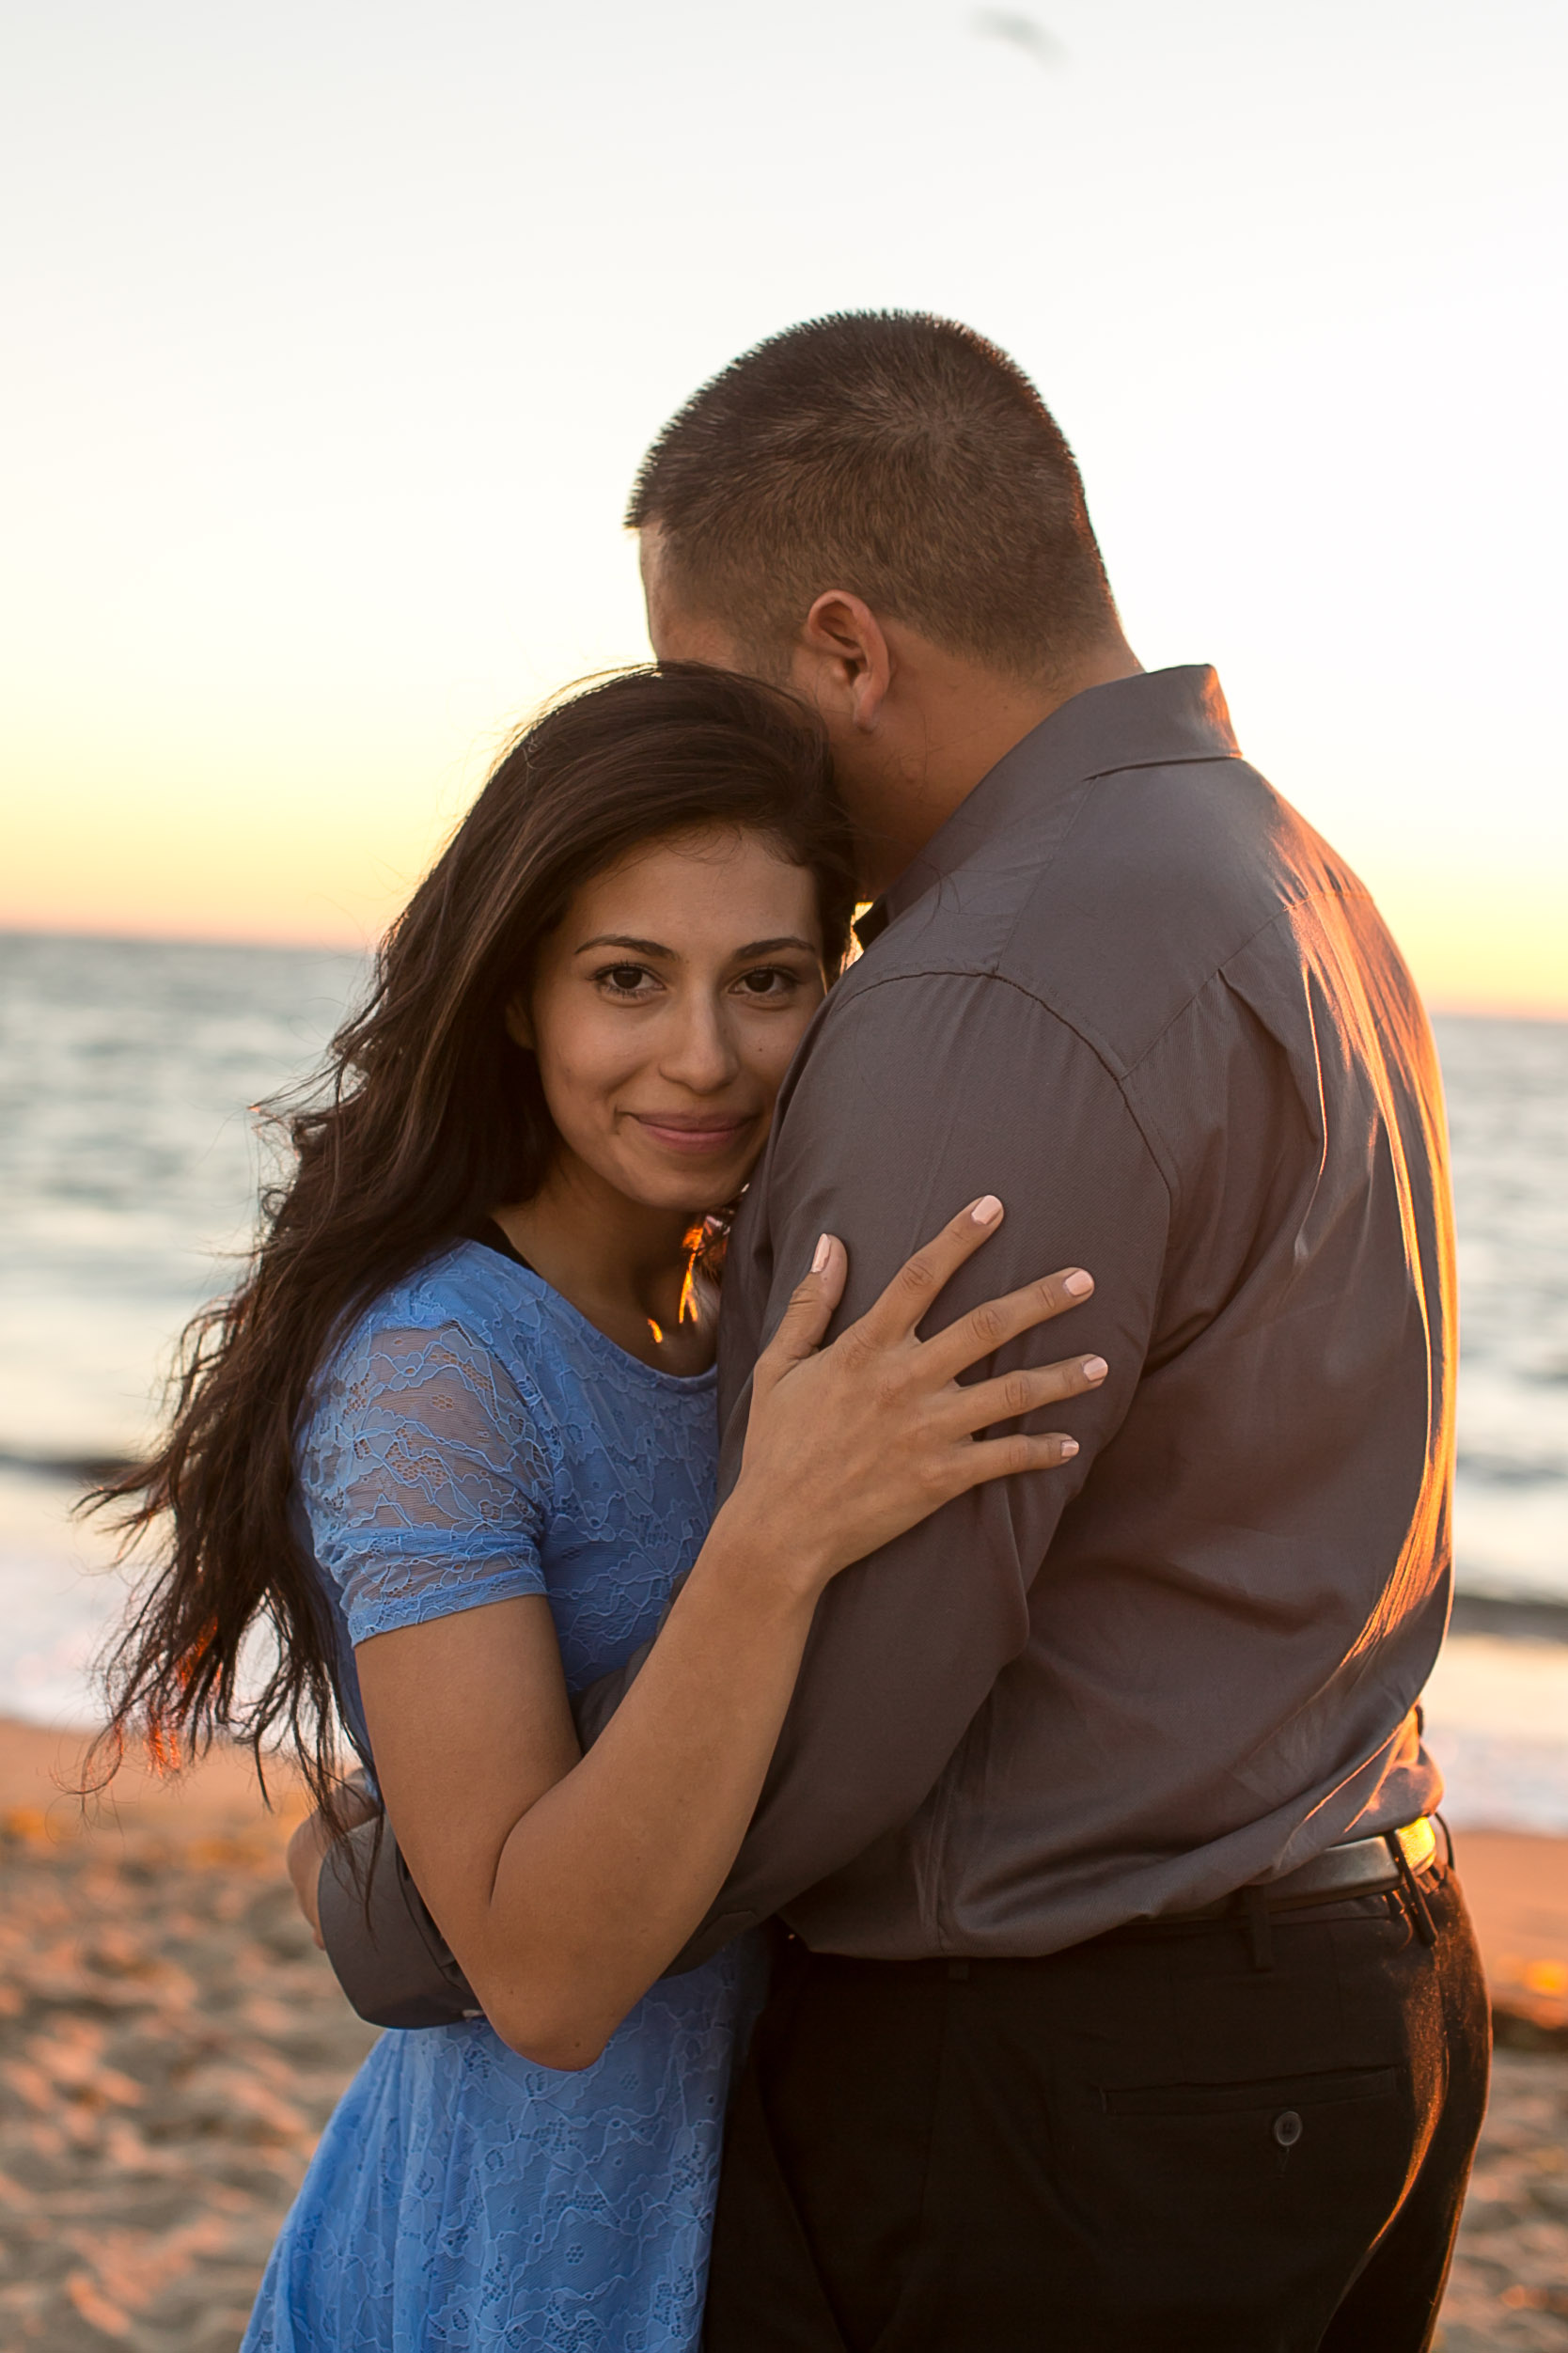 engagement session, redondo beach, love, fiance, los angeles wedding photography, chris holt photography